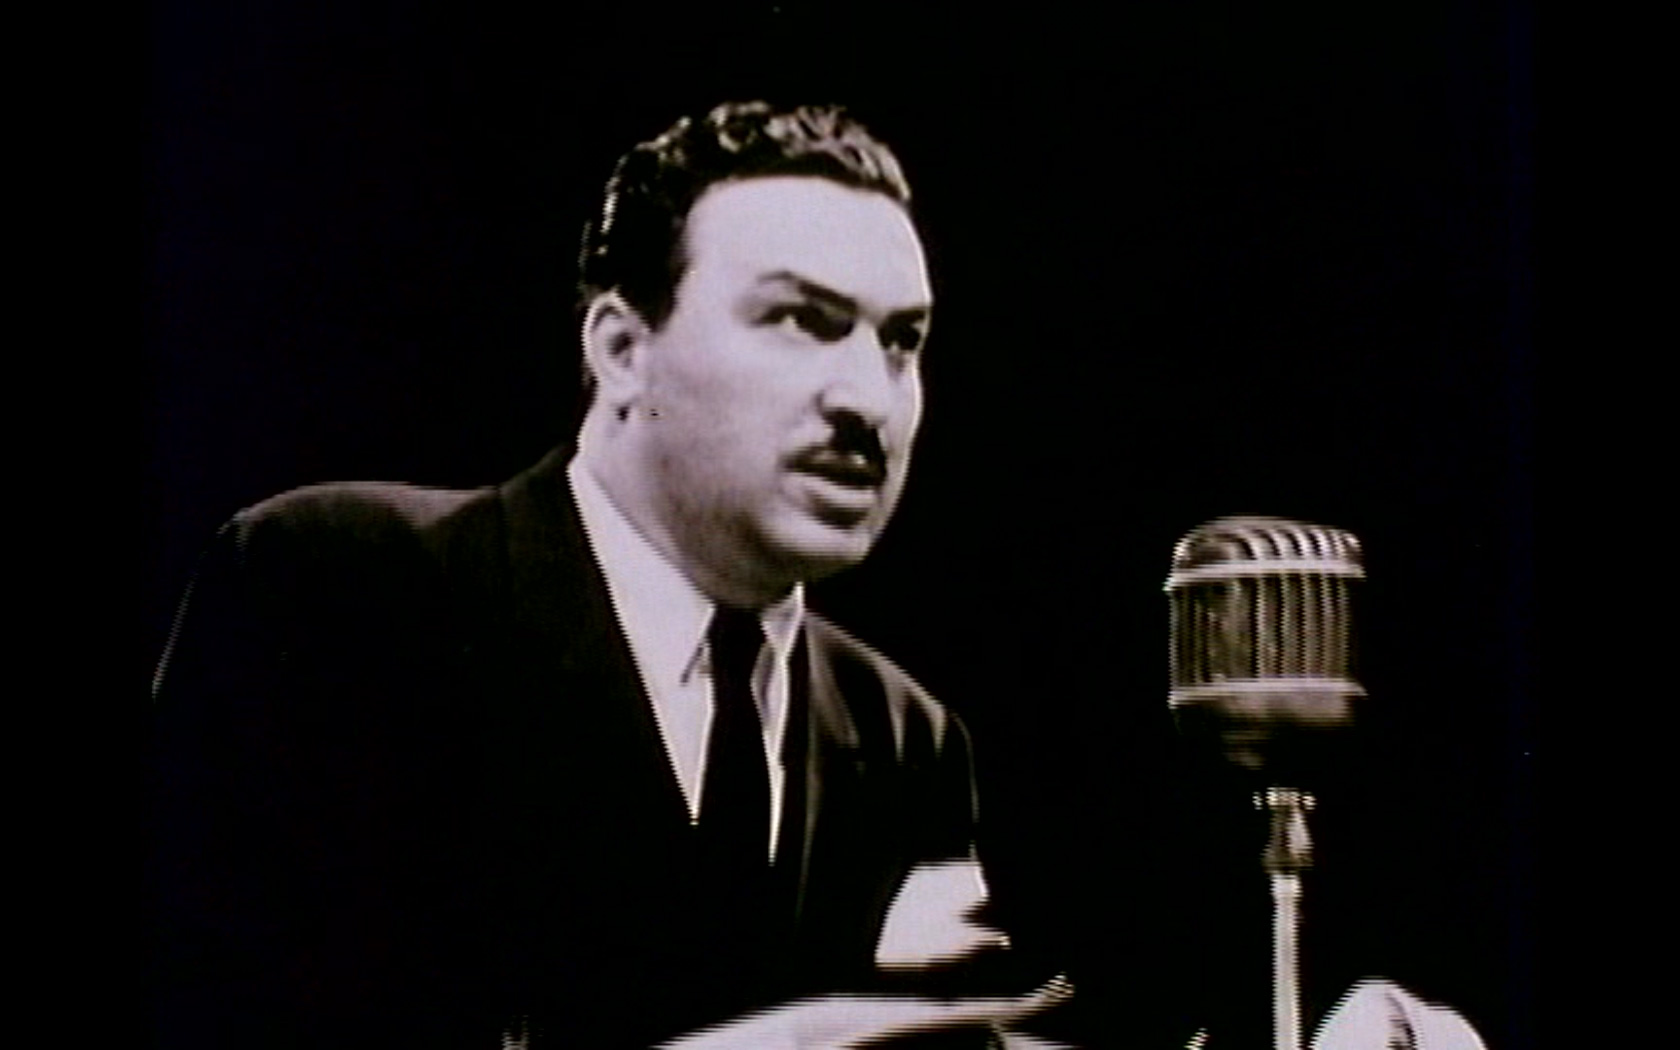 who was adam clayton powell jr and why was adam clayton powell jr a controversial figure in politics